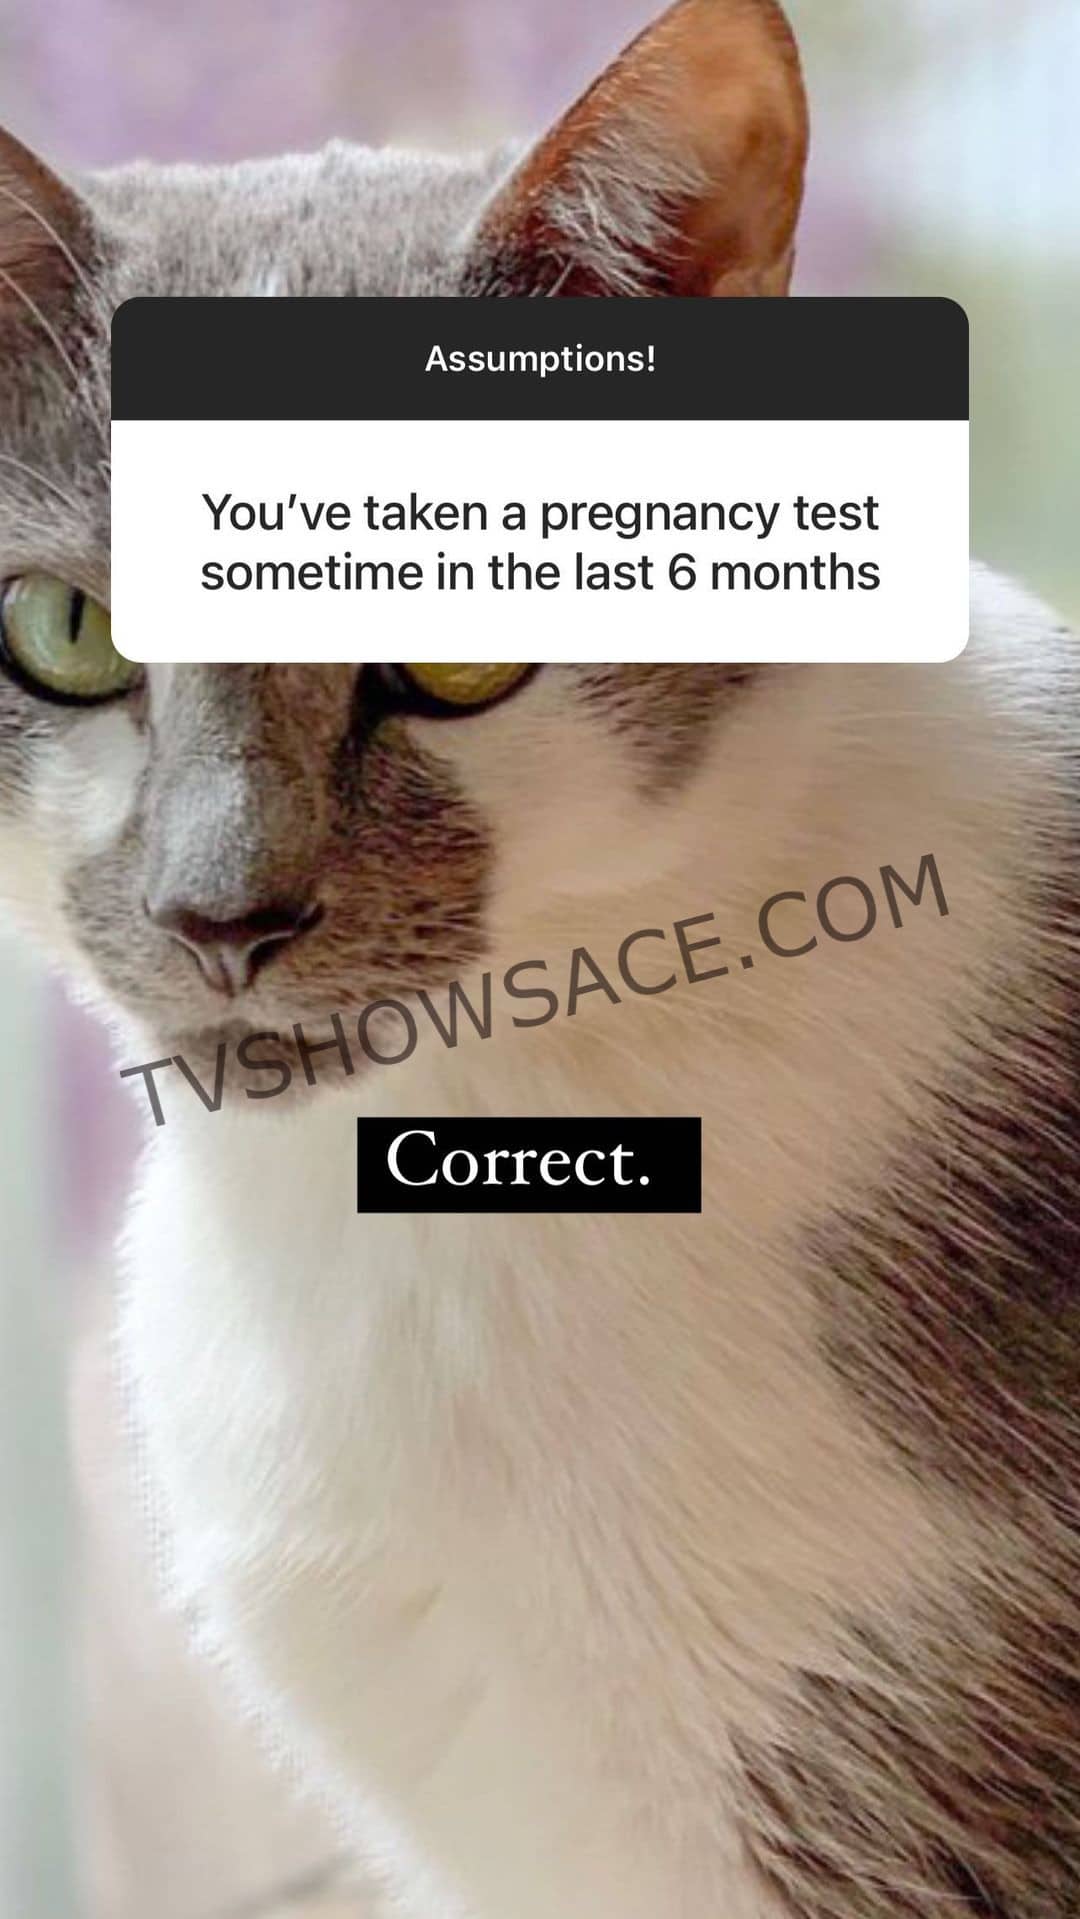 "Youve taken a pregnancy test sometime in the last 6 months." "Correct."